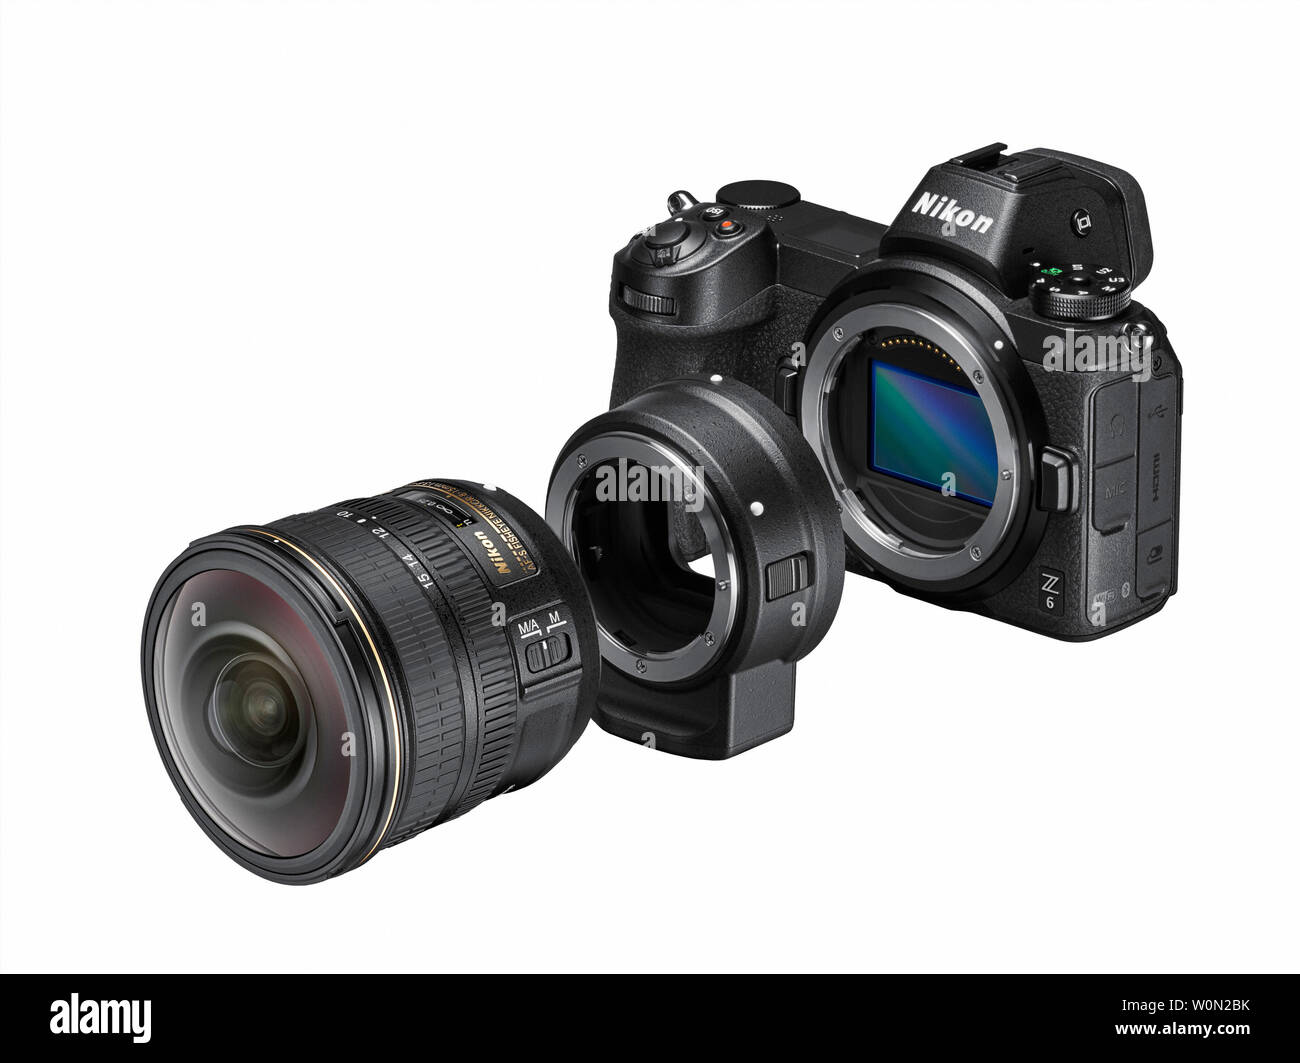 Nikon Inc. announced on August 23, 2018, the release of its full-frame Nikon  Z 6 mirrorless camera, as well as NIKKOR Z lenses, which feature a new,  larger-diameter mount. The Z 6